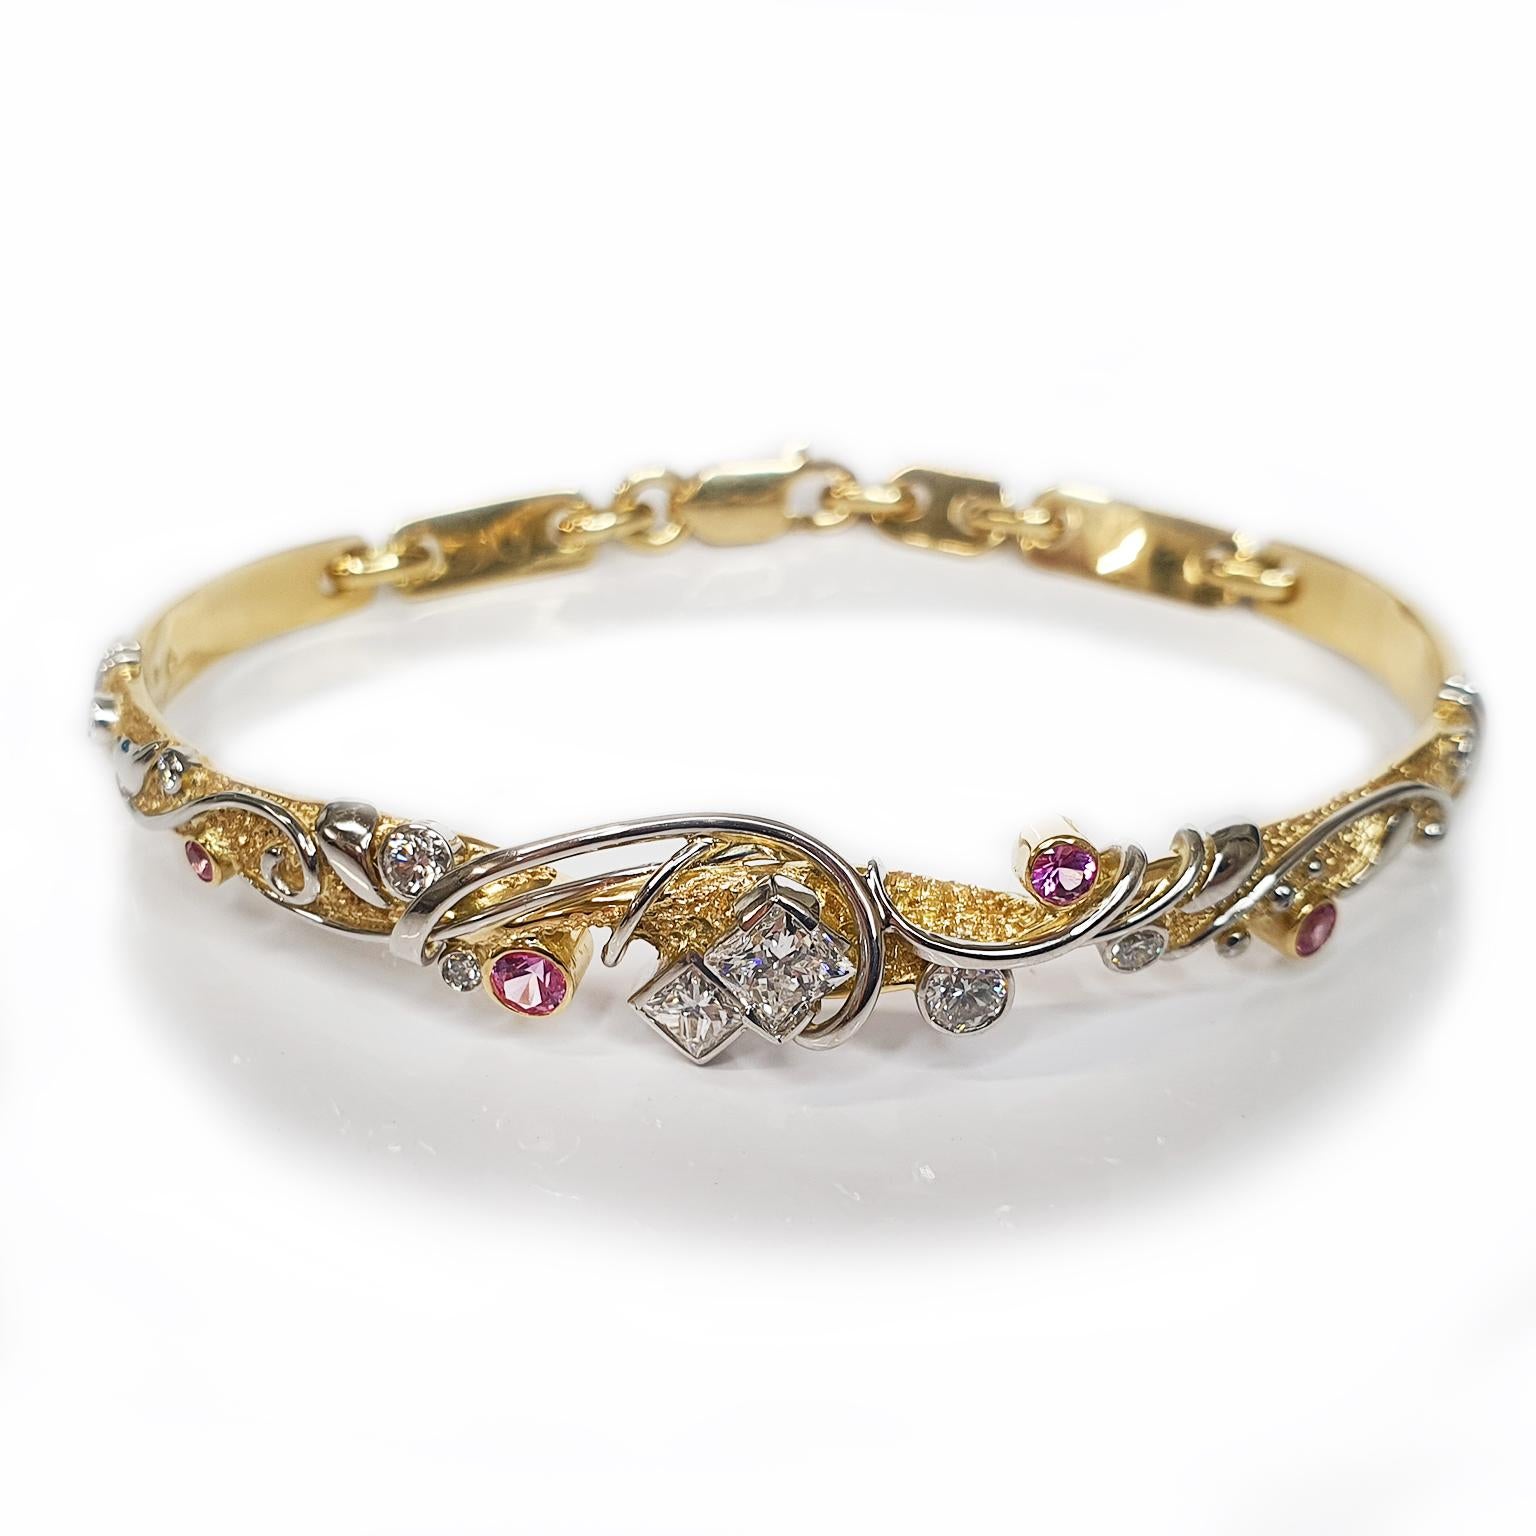 Paul Amey’s bangle was crafted from 18K yellow gold, platinum, diamonds and pink sapphires. This narrow bangle is worn low on the wrist and is finished with Paul Amey’s signature texture with an overlay of platinum “vine”. The rear chain is hand